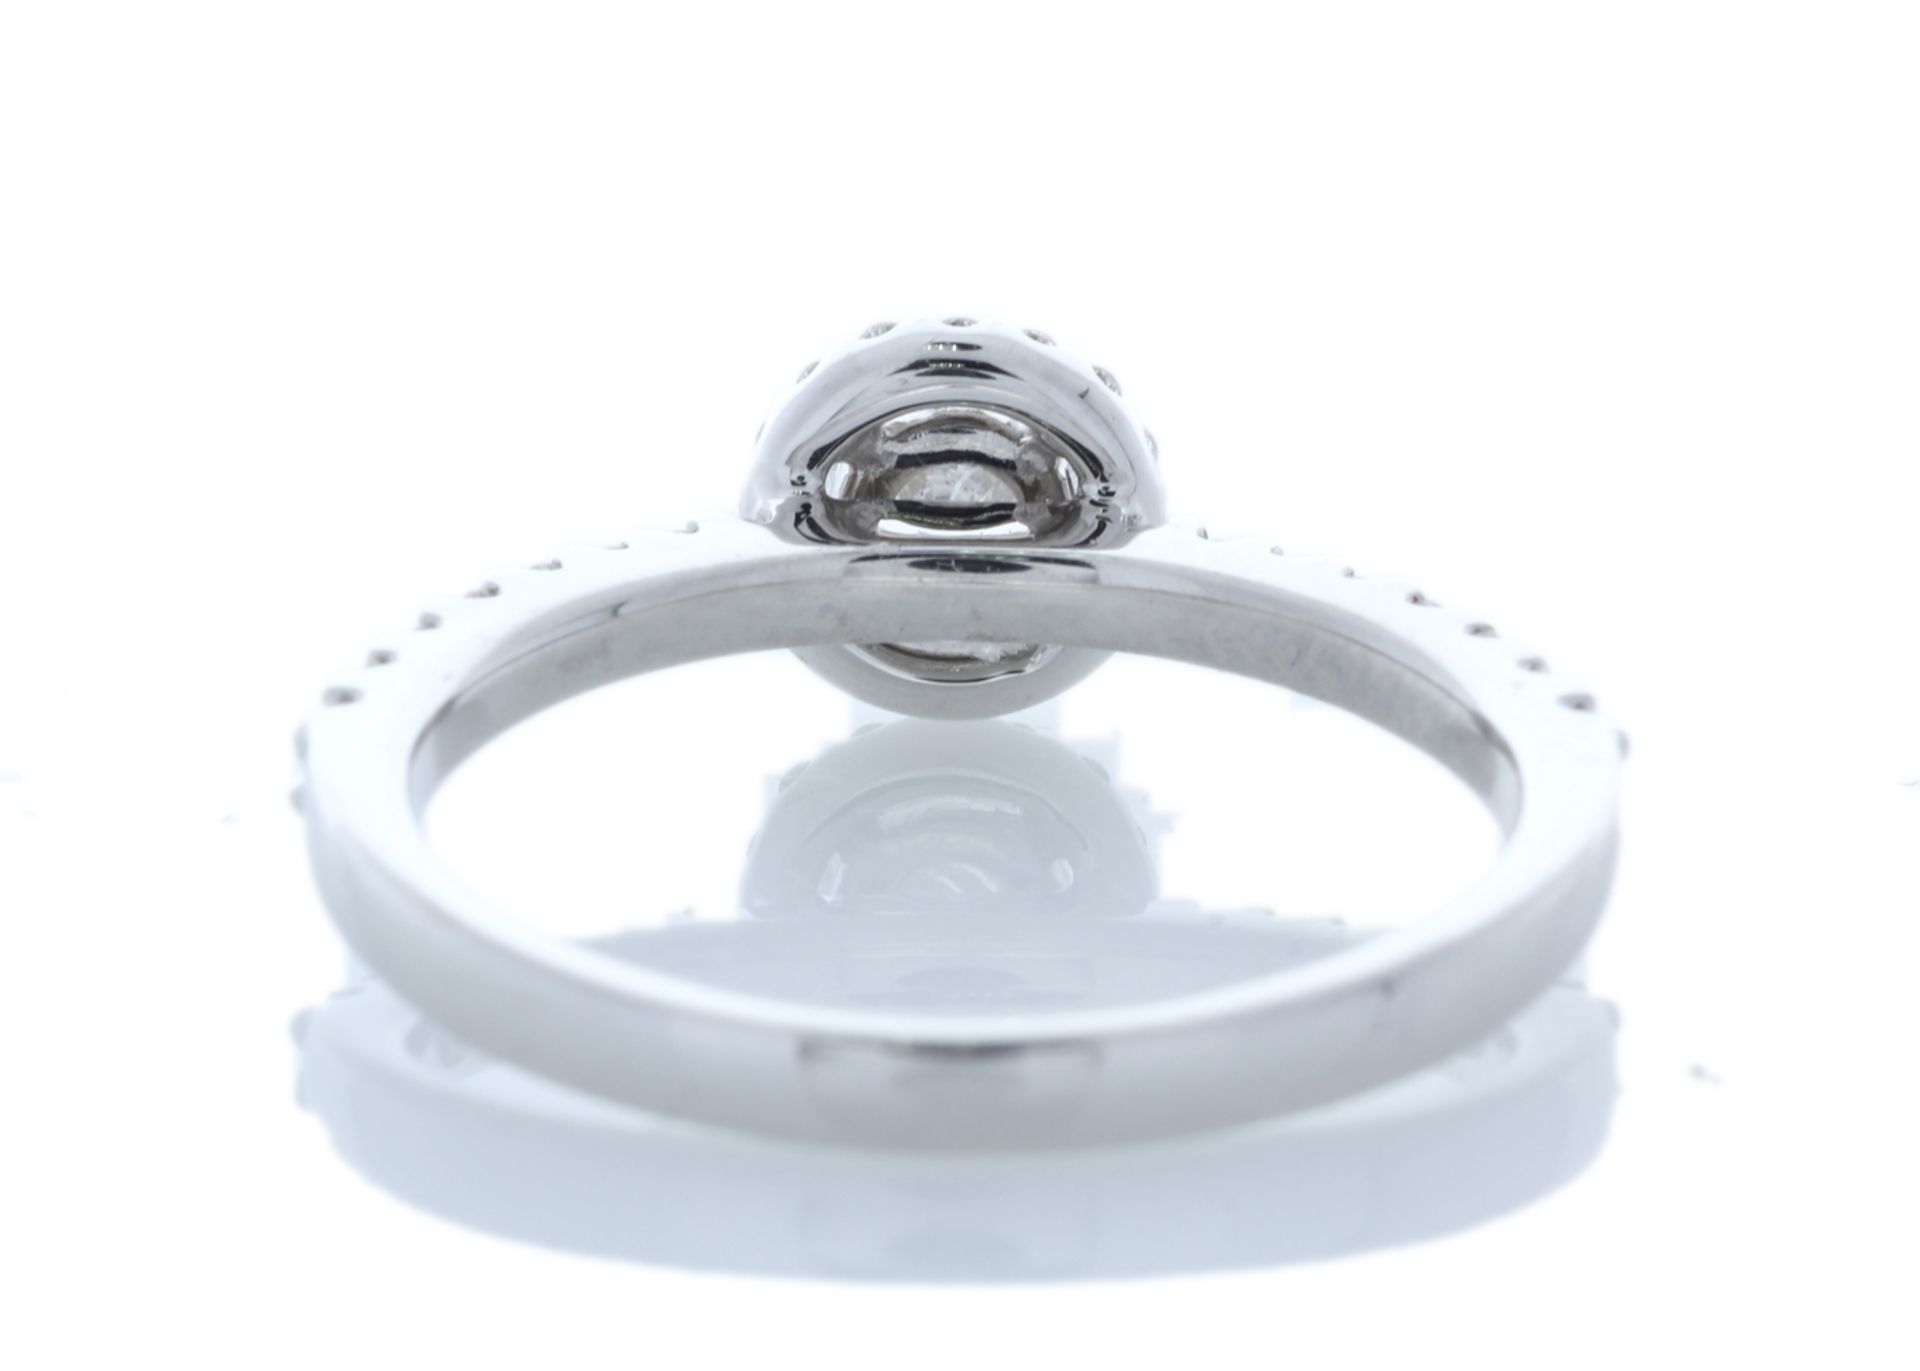 18ct White Gold Single Stone With Halo Setting Ring (0.31) 0.63 Carats - Valued By GIE £6,430.00 - - Image 3 of 5